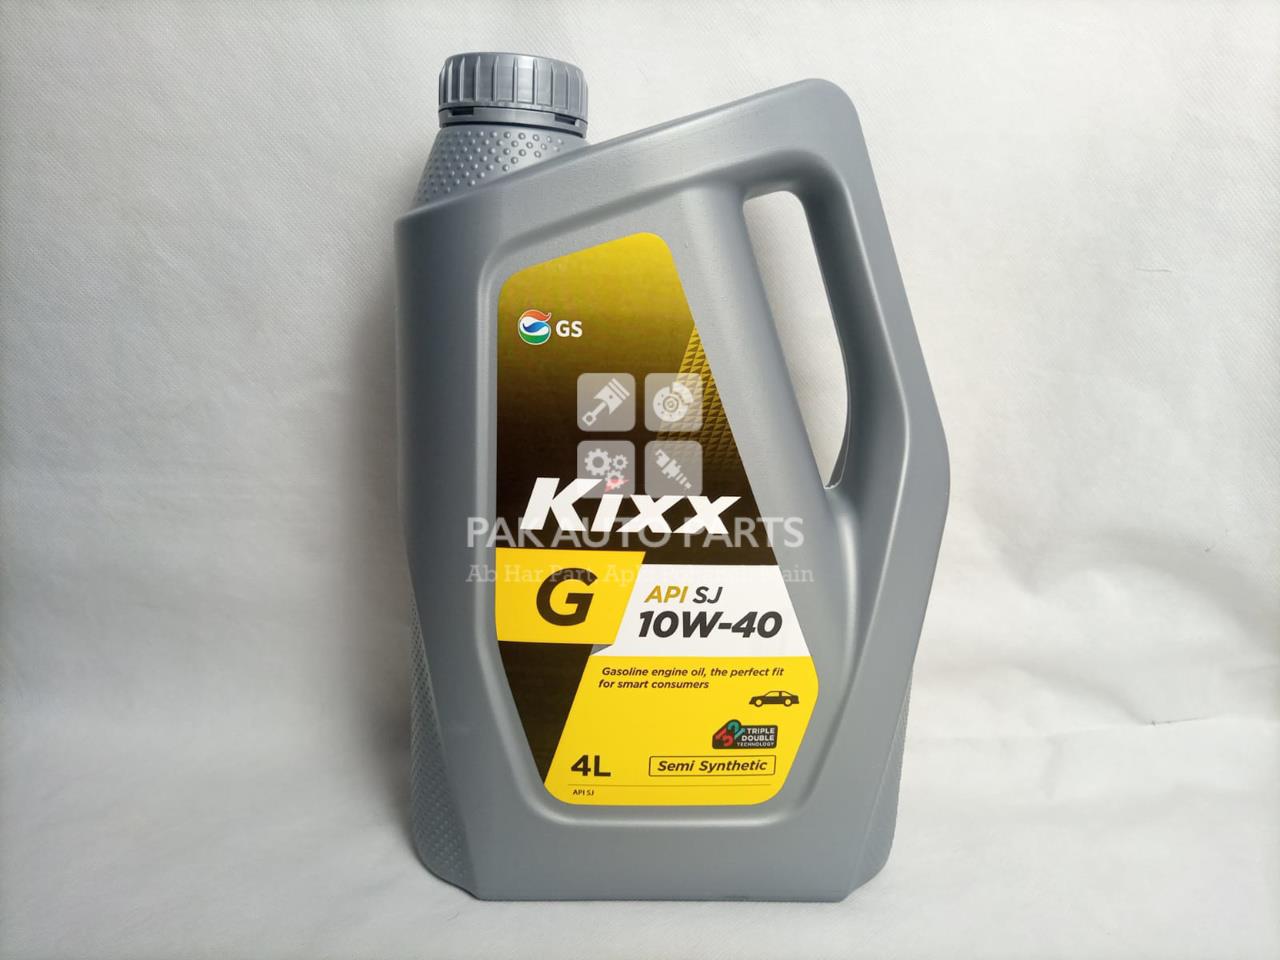 Picture of Kixx G API SJ 10w-40  (4L)  Gasoline engine oil, the perfect fit for smart consumers